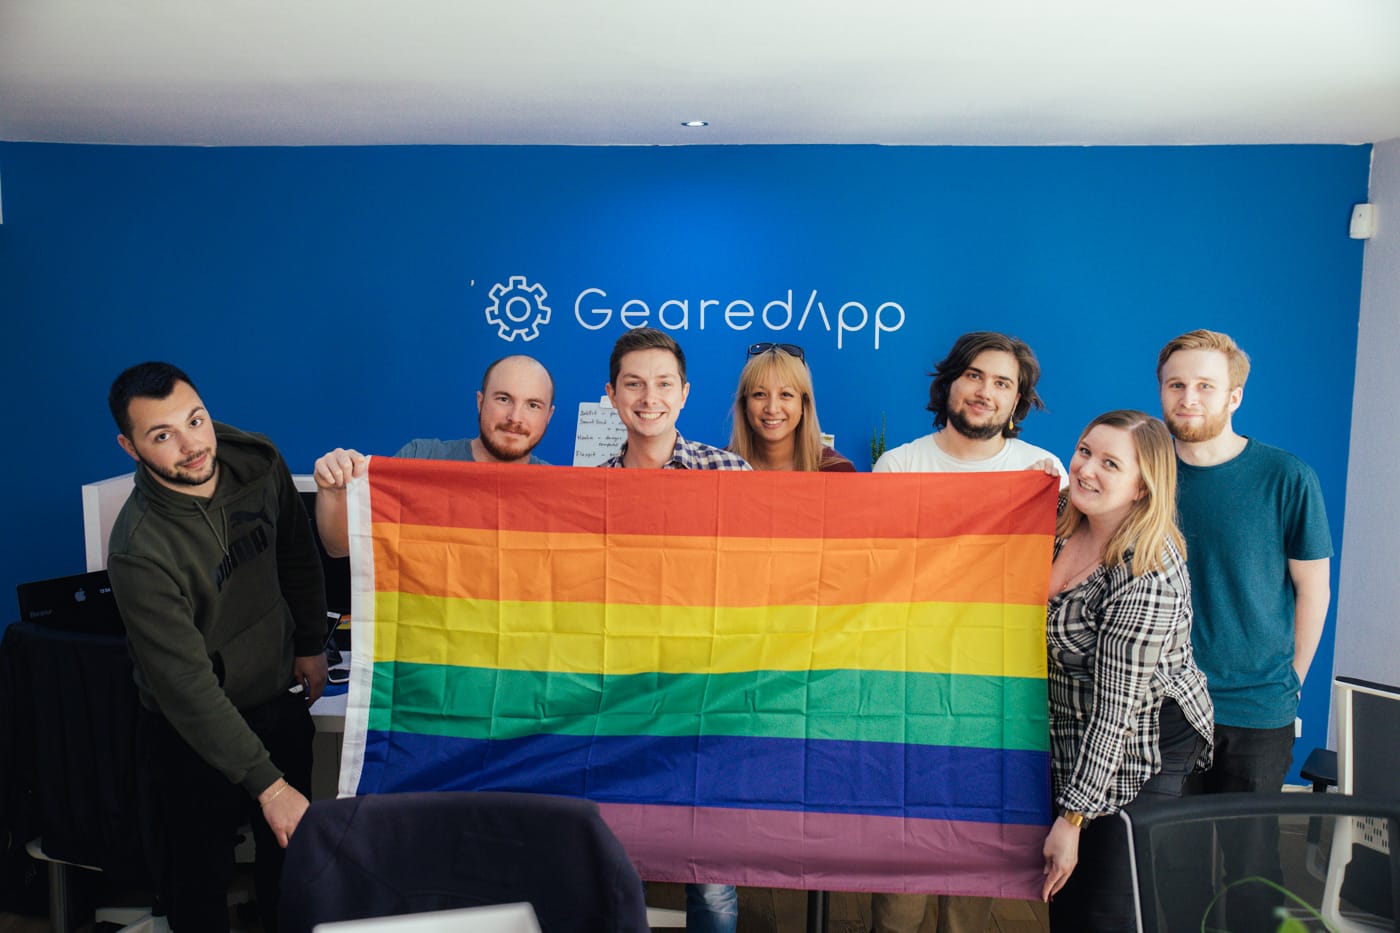 7 ways to improve diversity in tech and support your LGBTQ+ team